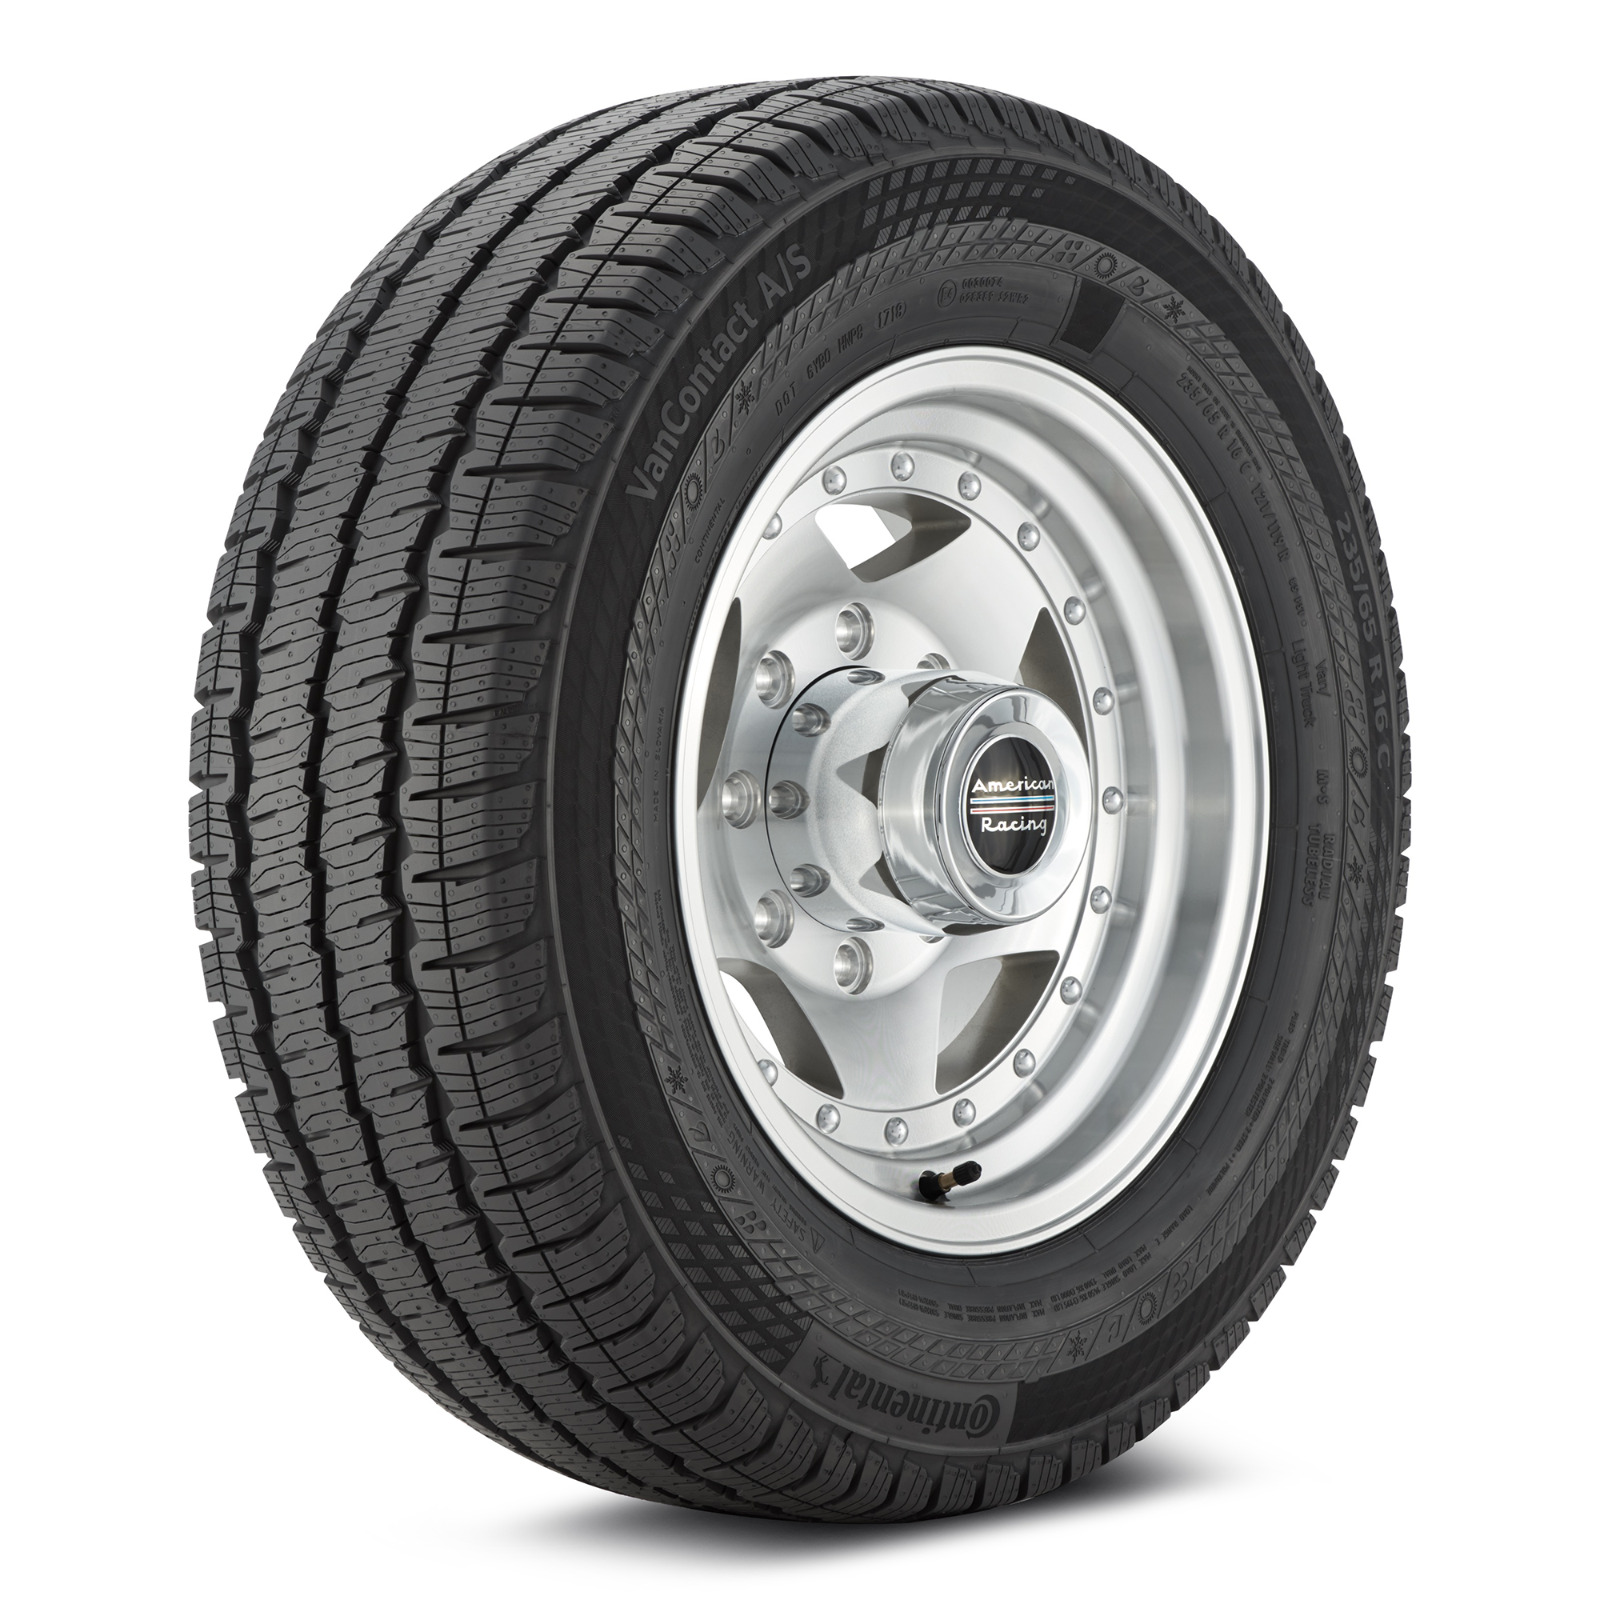 235/65R16C Continental VanContact A/S 121/119R 10PLY LOAD E M+S